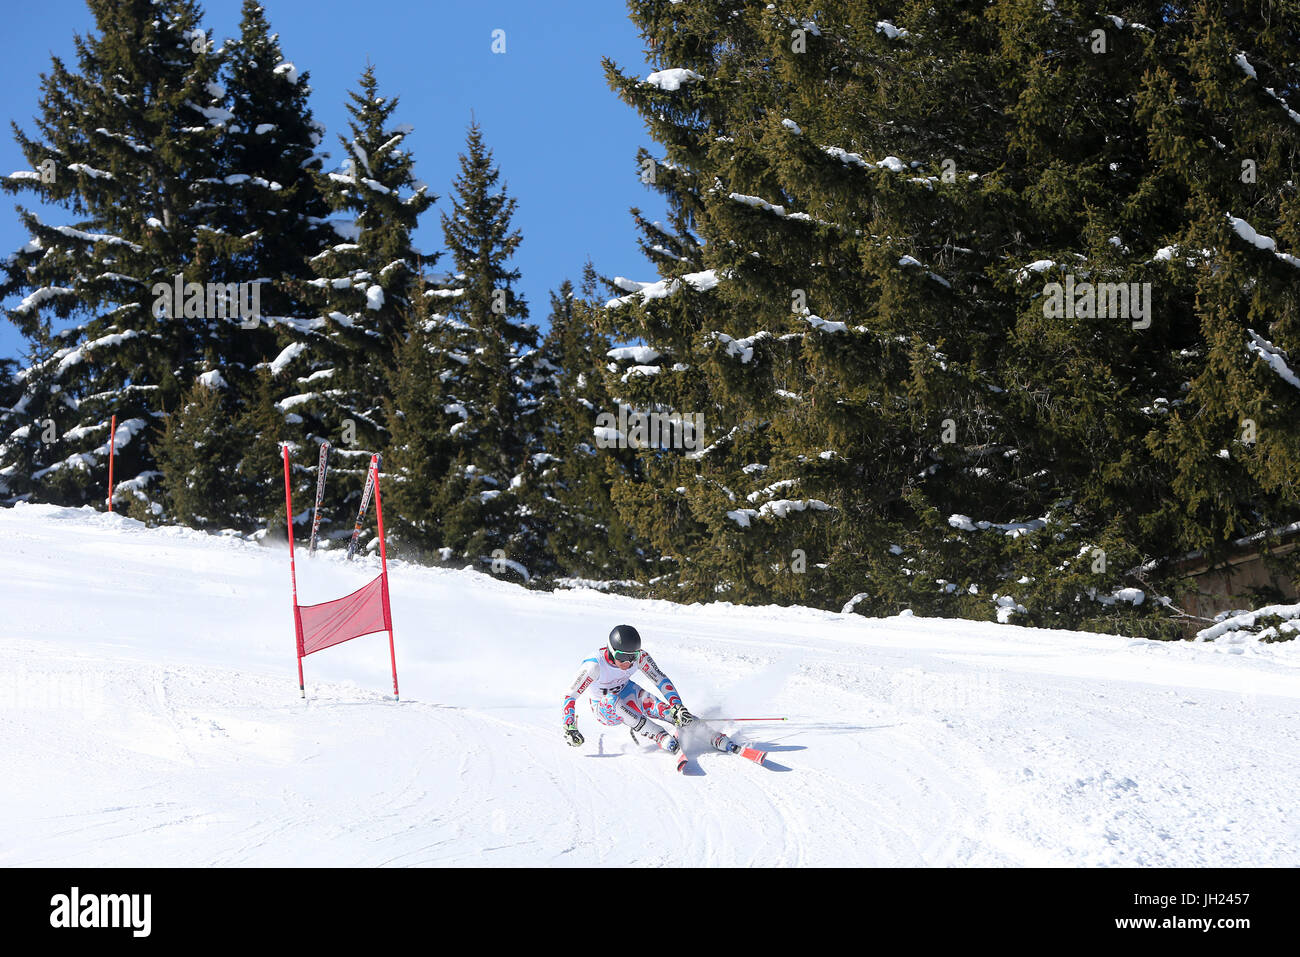 French Alps.  Giant Slalom skier rounds gate at high speed.  France. Stock Photo